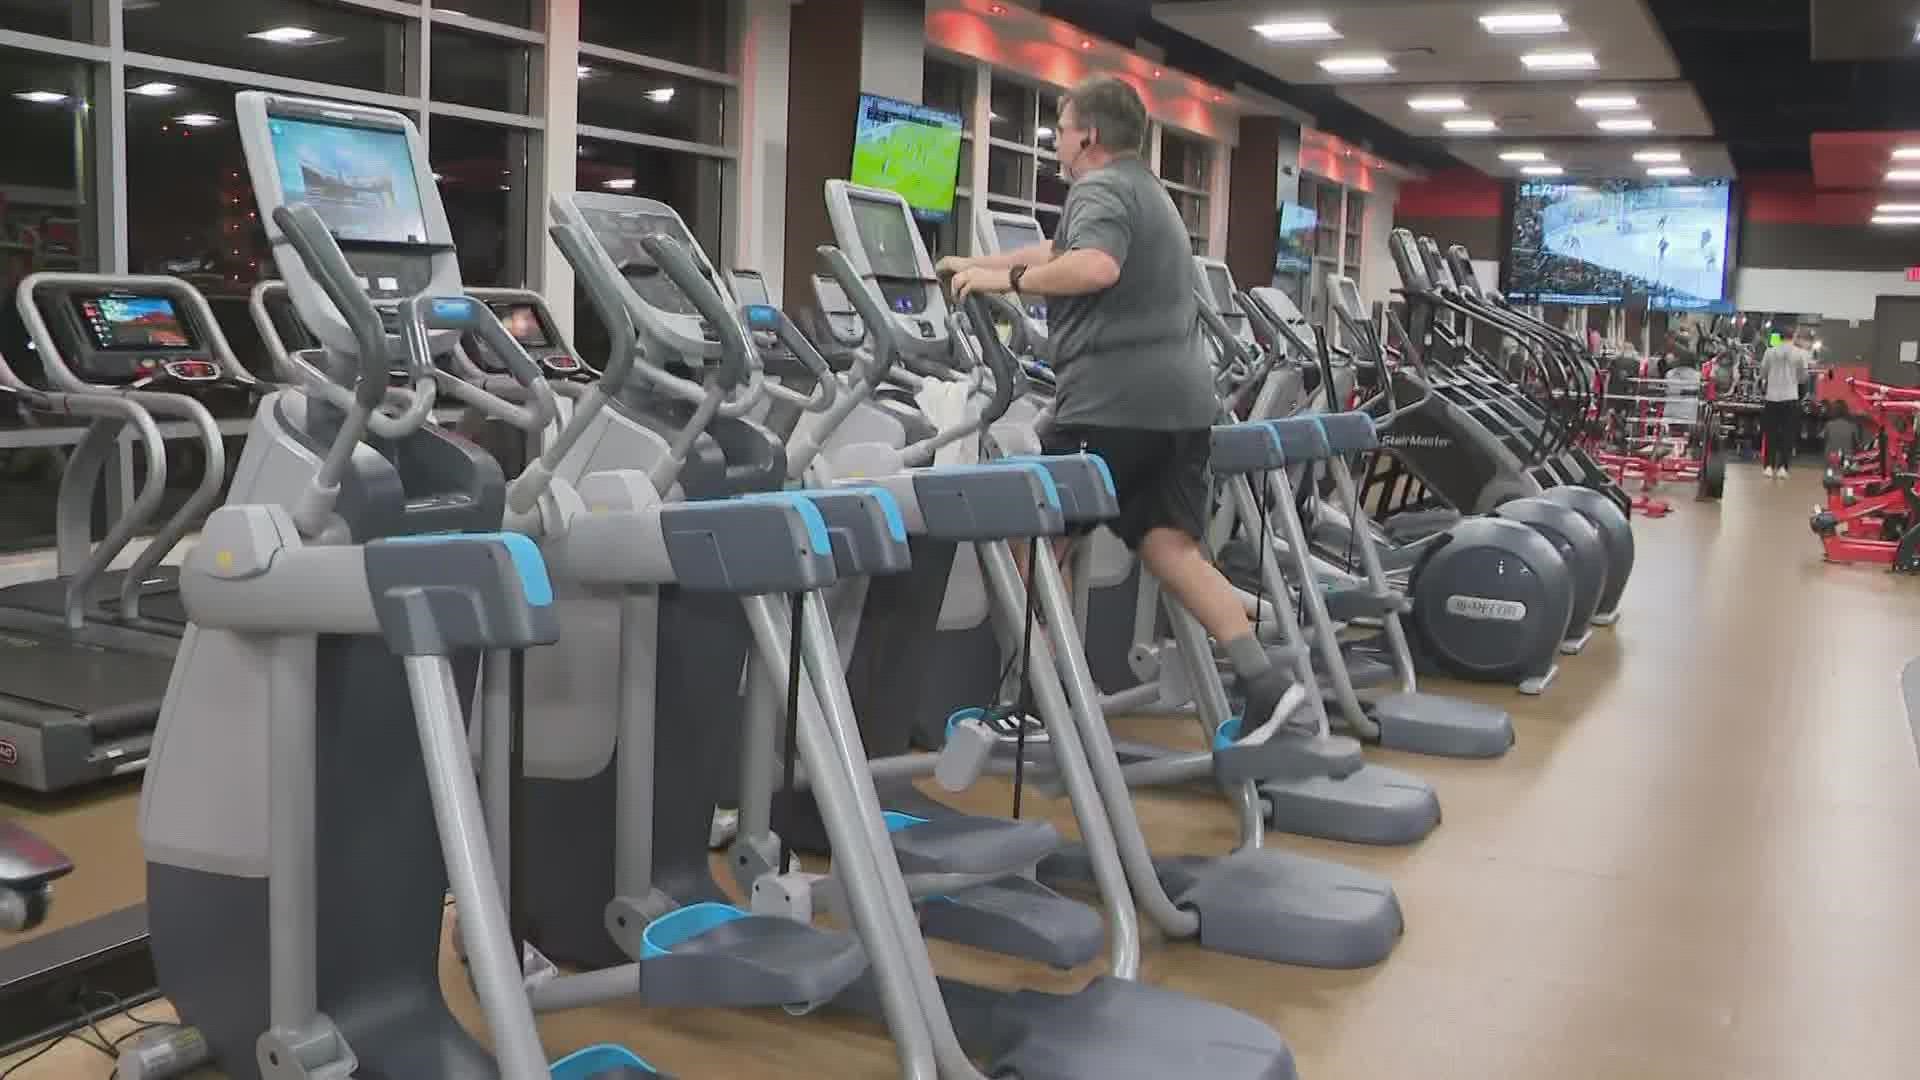 We explore the exercise options at Browns Fit in Cleveland.